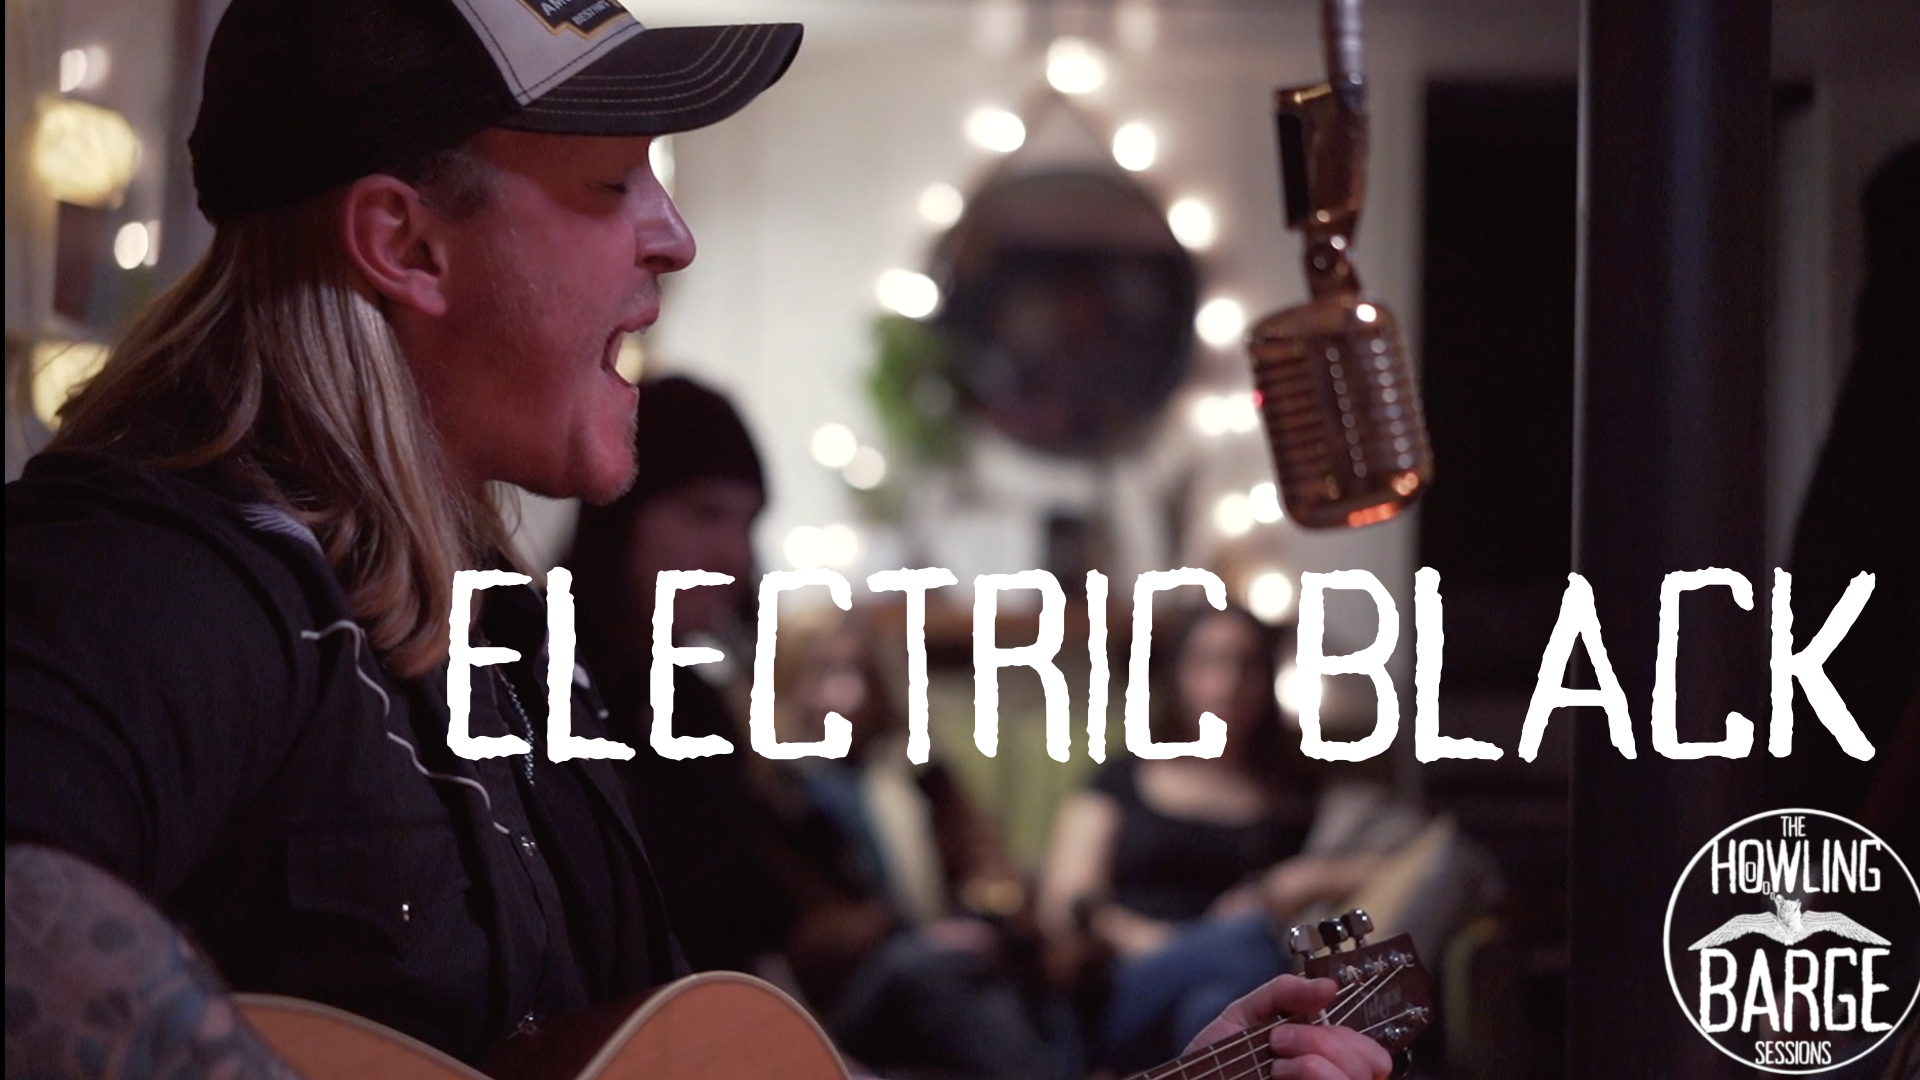 Electric Black- Session trailer (Howling Barge sessions)